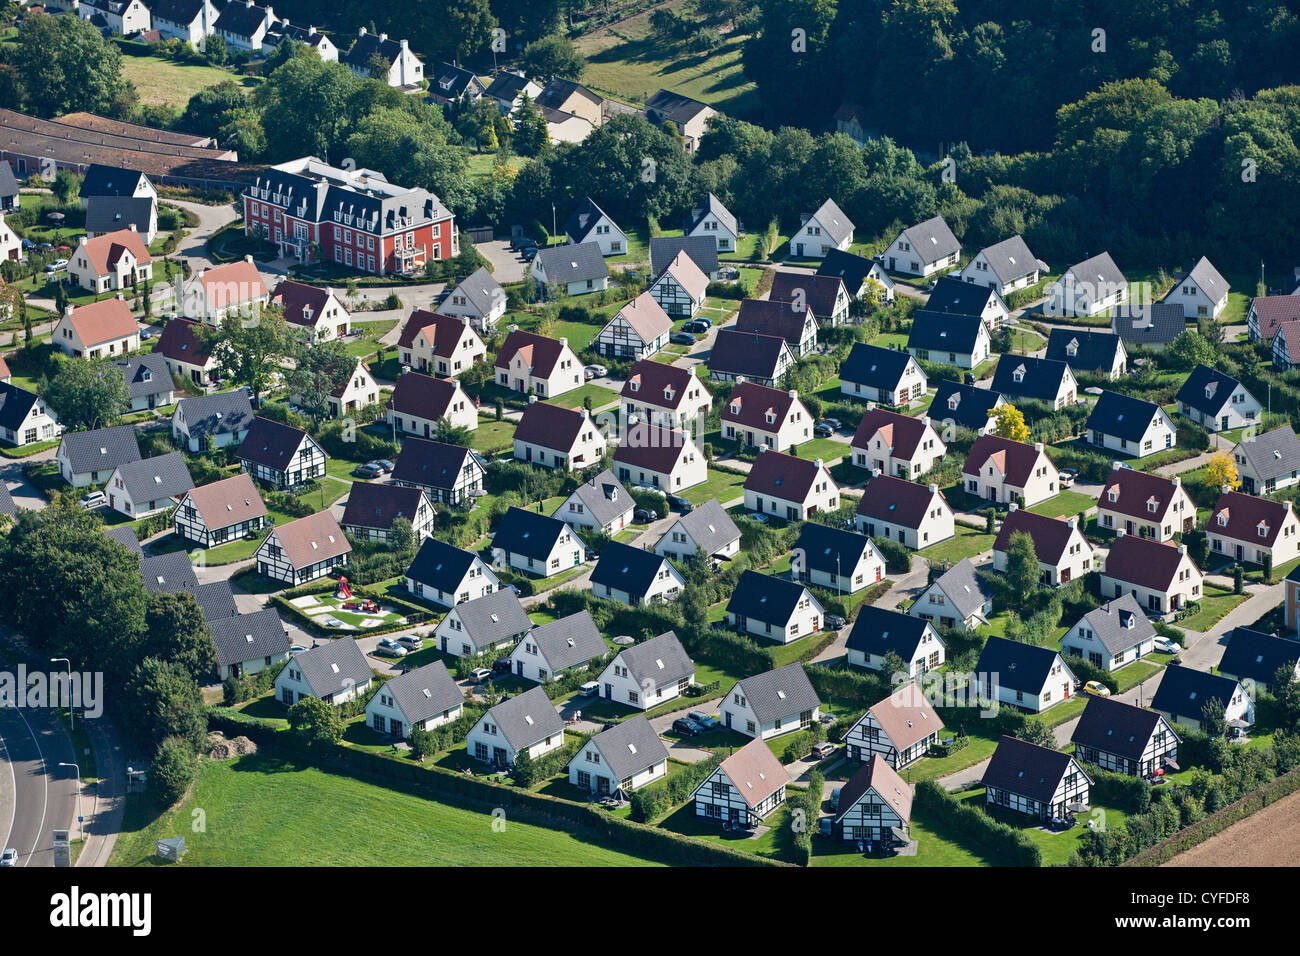 The Netherlands, Valkenburg, Luxury holiday houses in traditional style. Aerial. Stock Photo